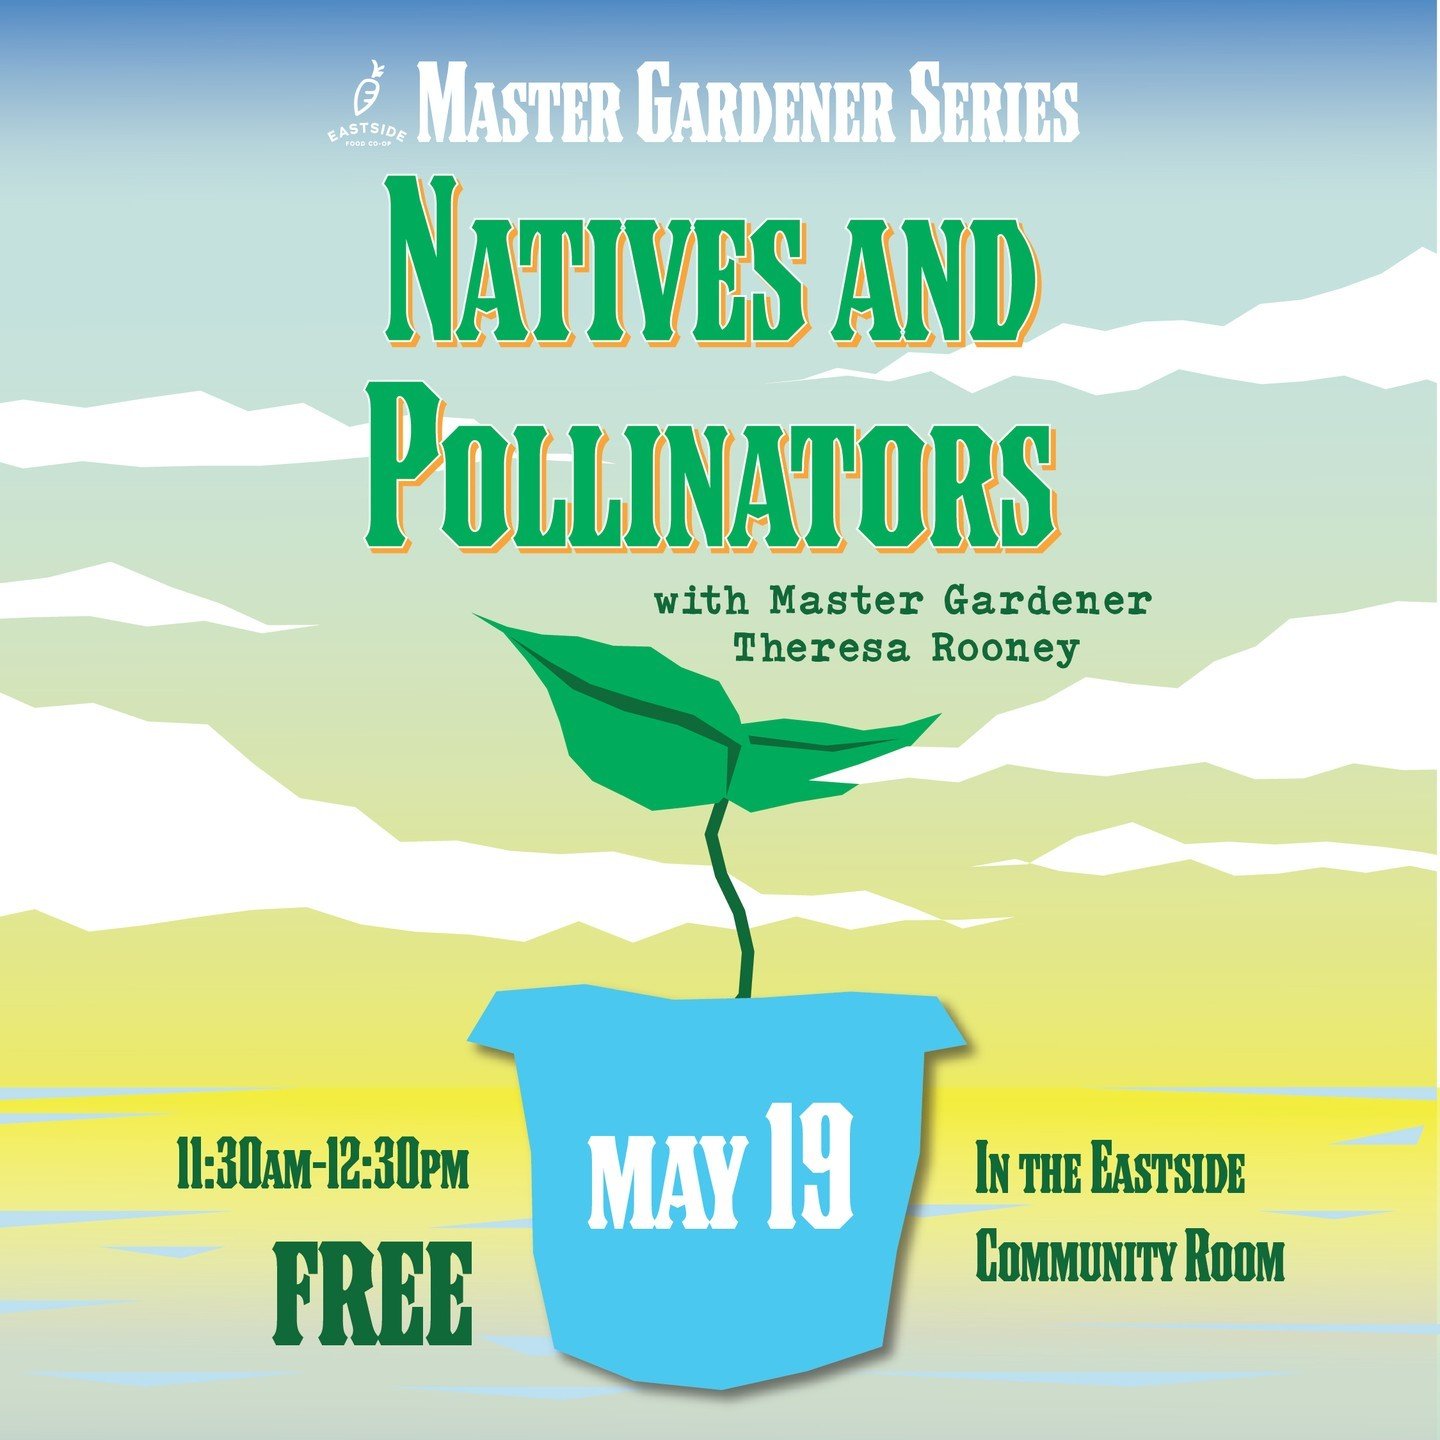 🌻🦋 Want to help our little pollinator friends thrive? Join Hennepin County Master Gardener, Theresa Rooney, for an class on native plants and pollinators! 🌸🐝 You'll discover what types of flowers bring pollinators to your garden, learn how to ide